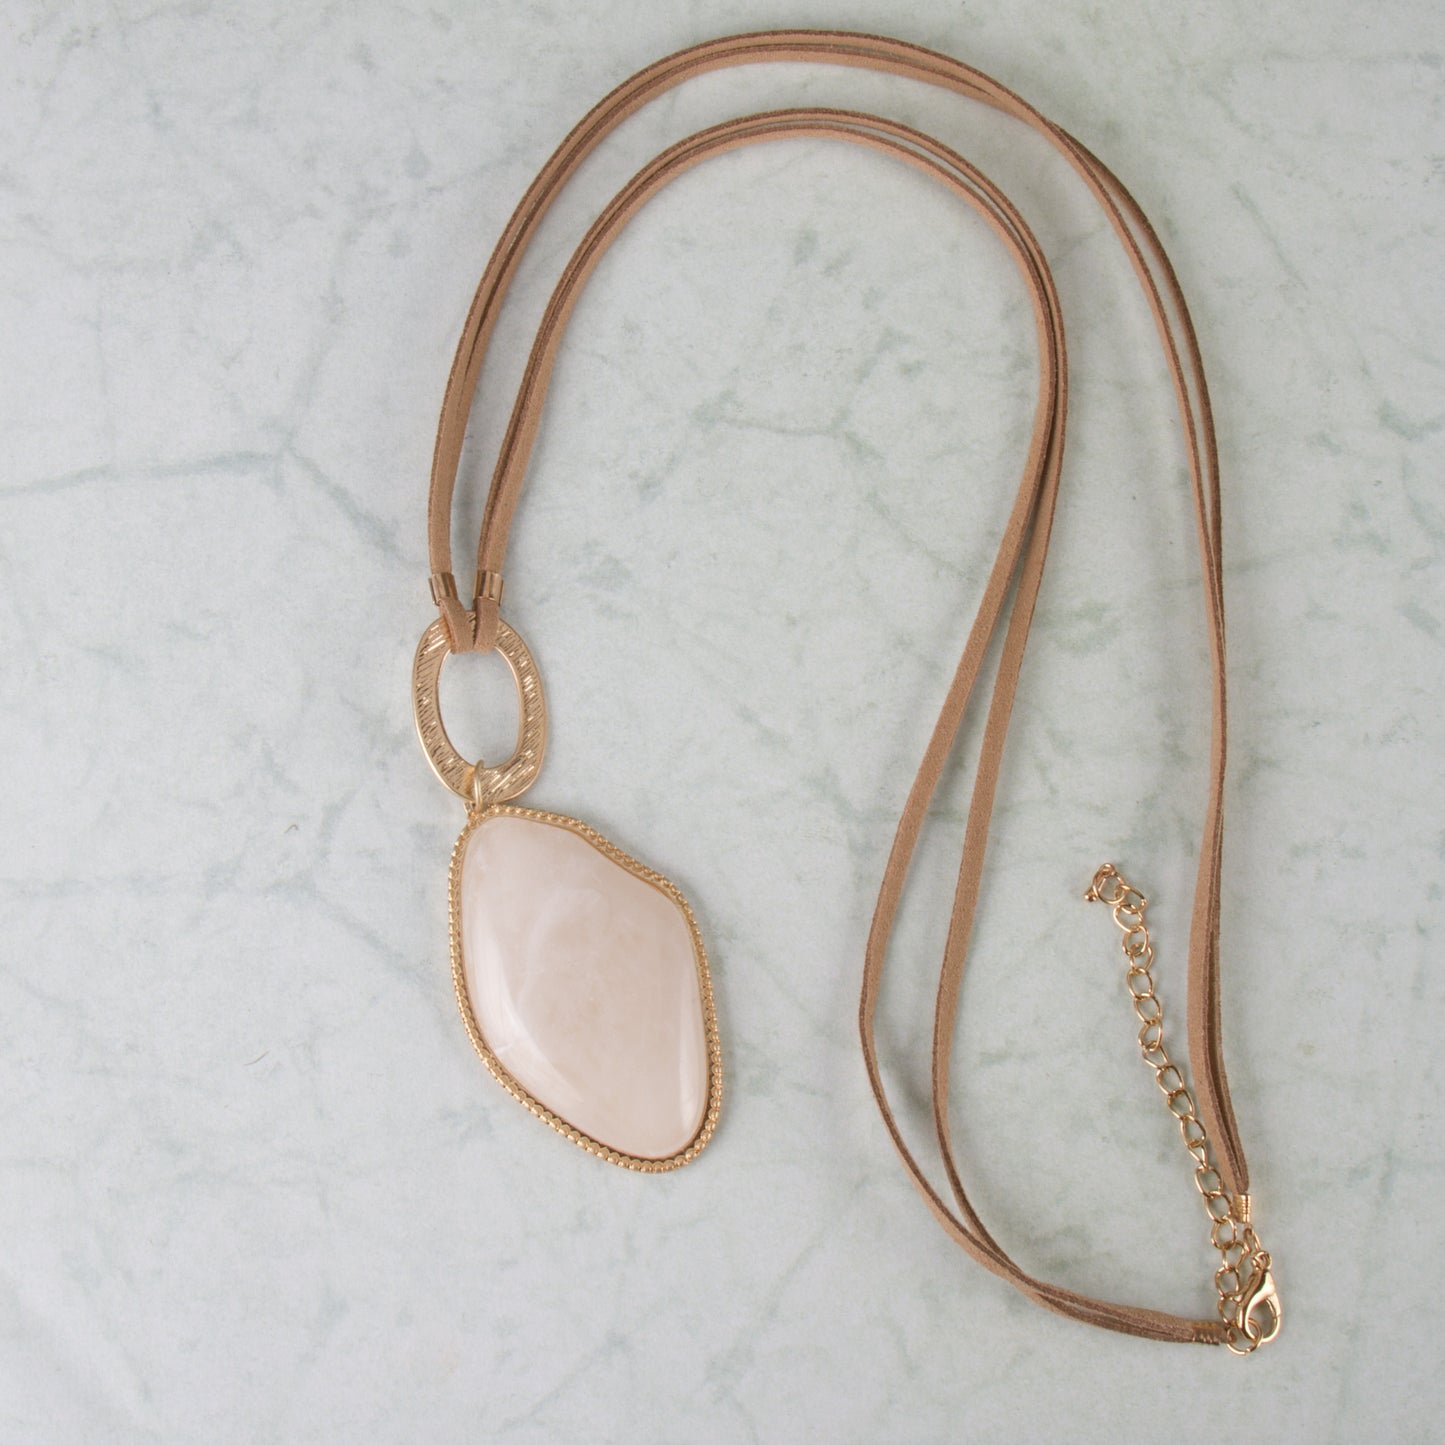 N3256 30" Suede Cord with Resin Pendant